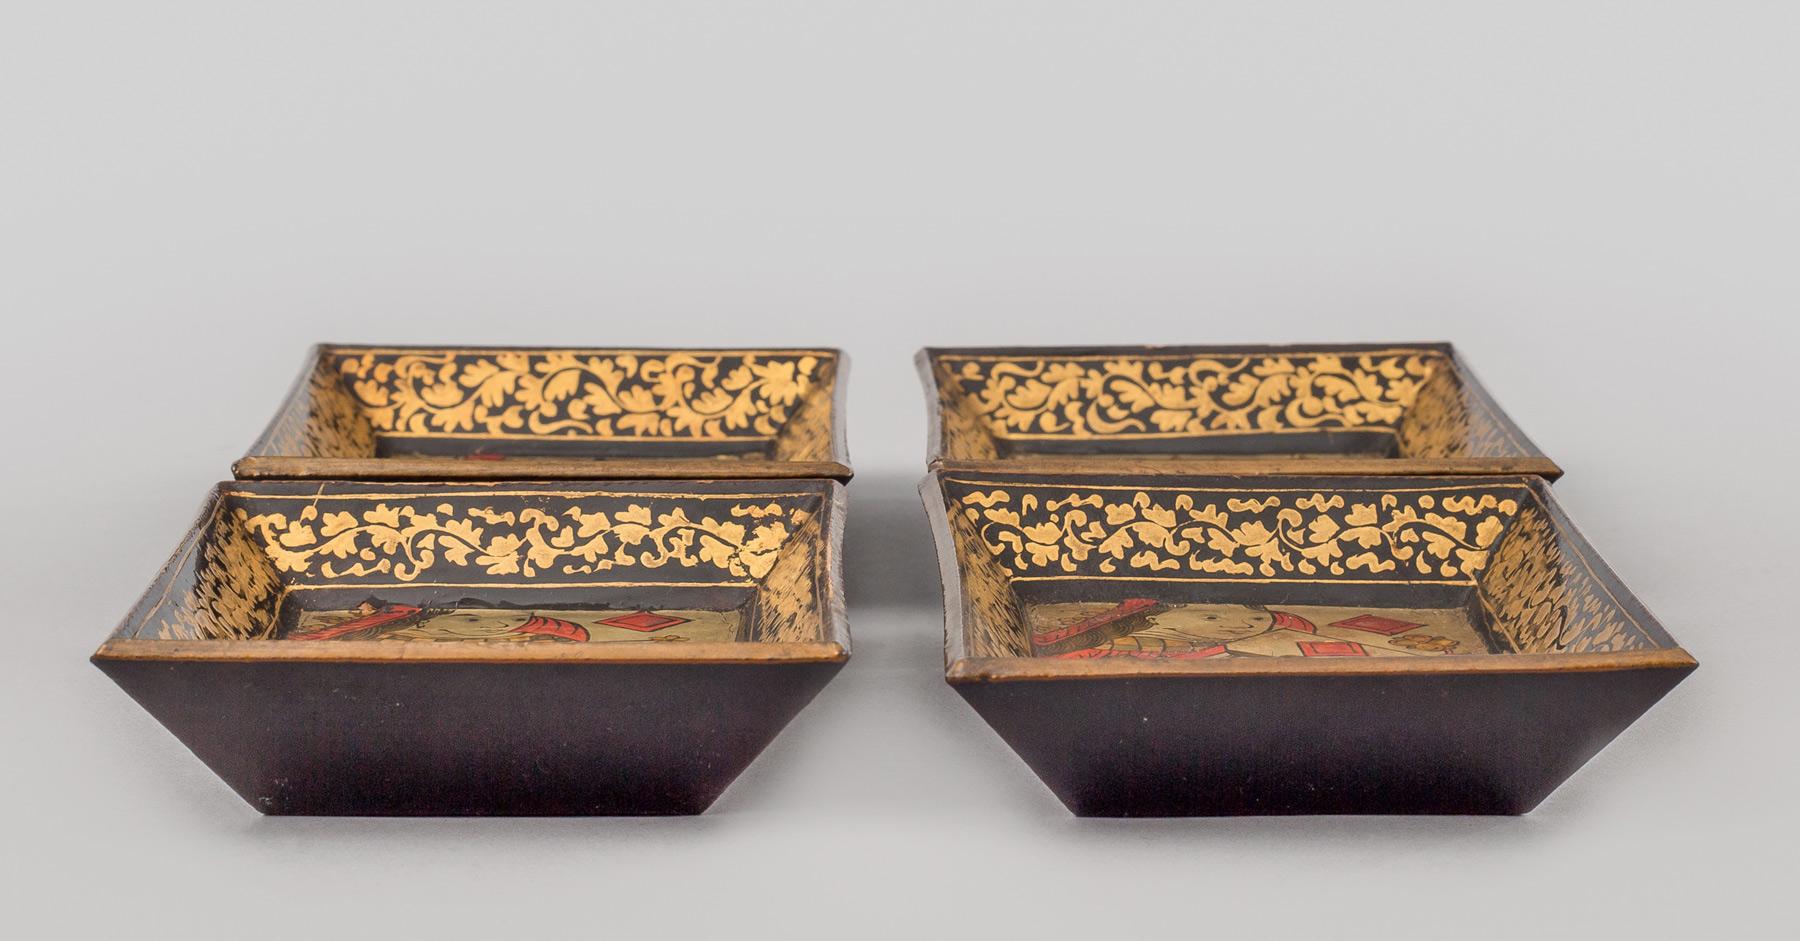 Set of eight Chinese Export Canton very small lacquered trays. Four depict the king and queen in red and gilded costumes against a black background; four depict figures in palace scenes with pagodas against a gilded and black background.